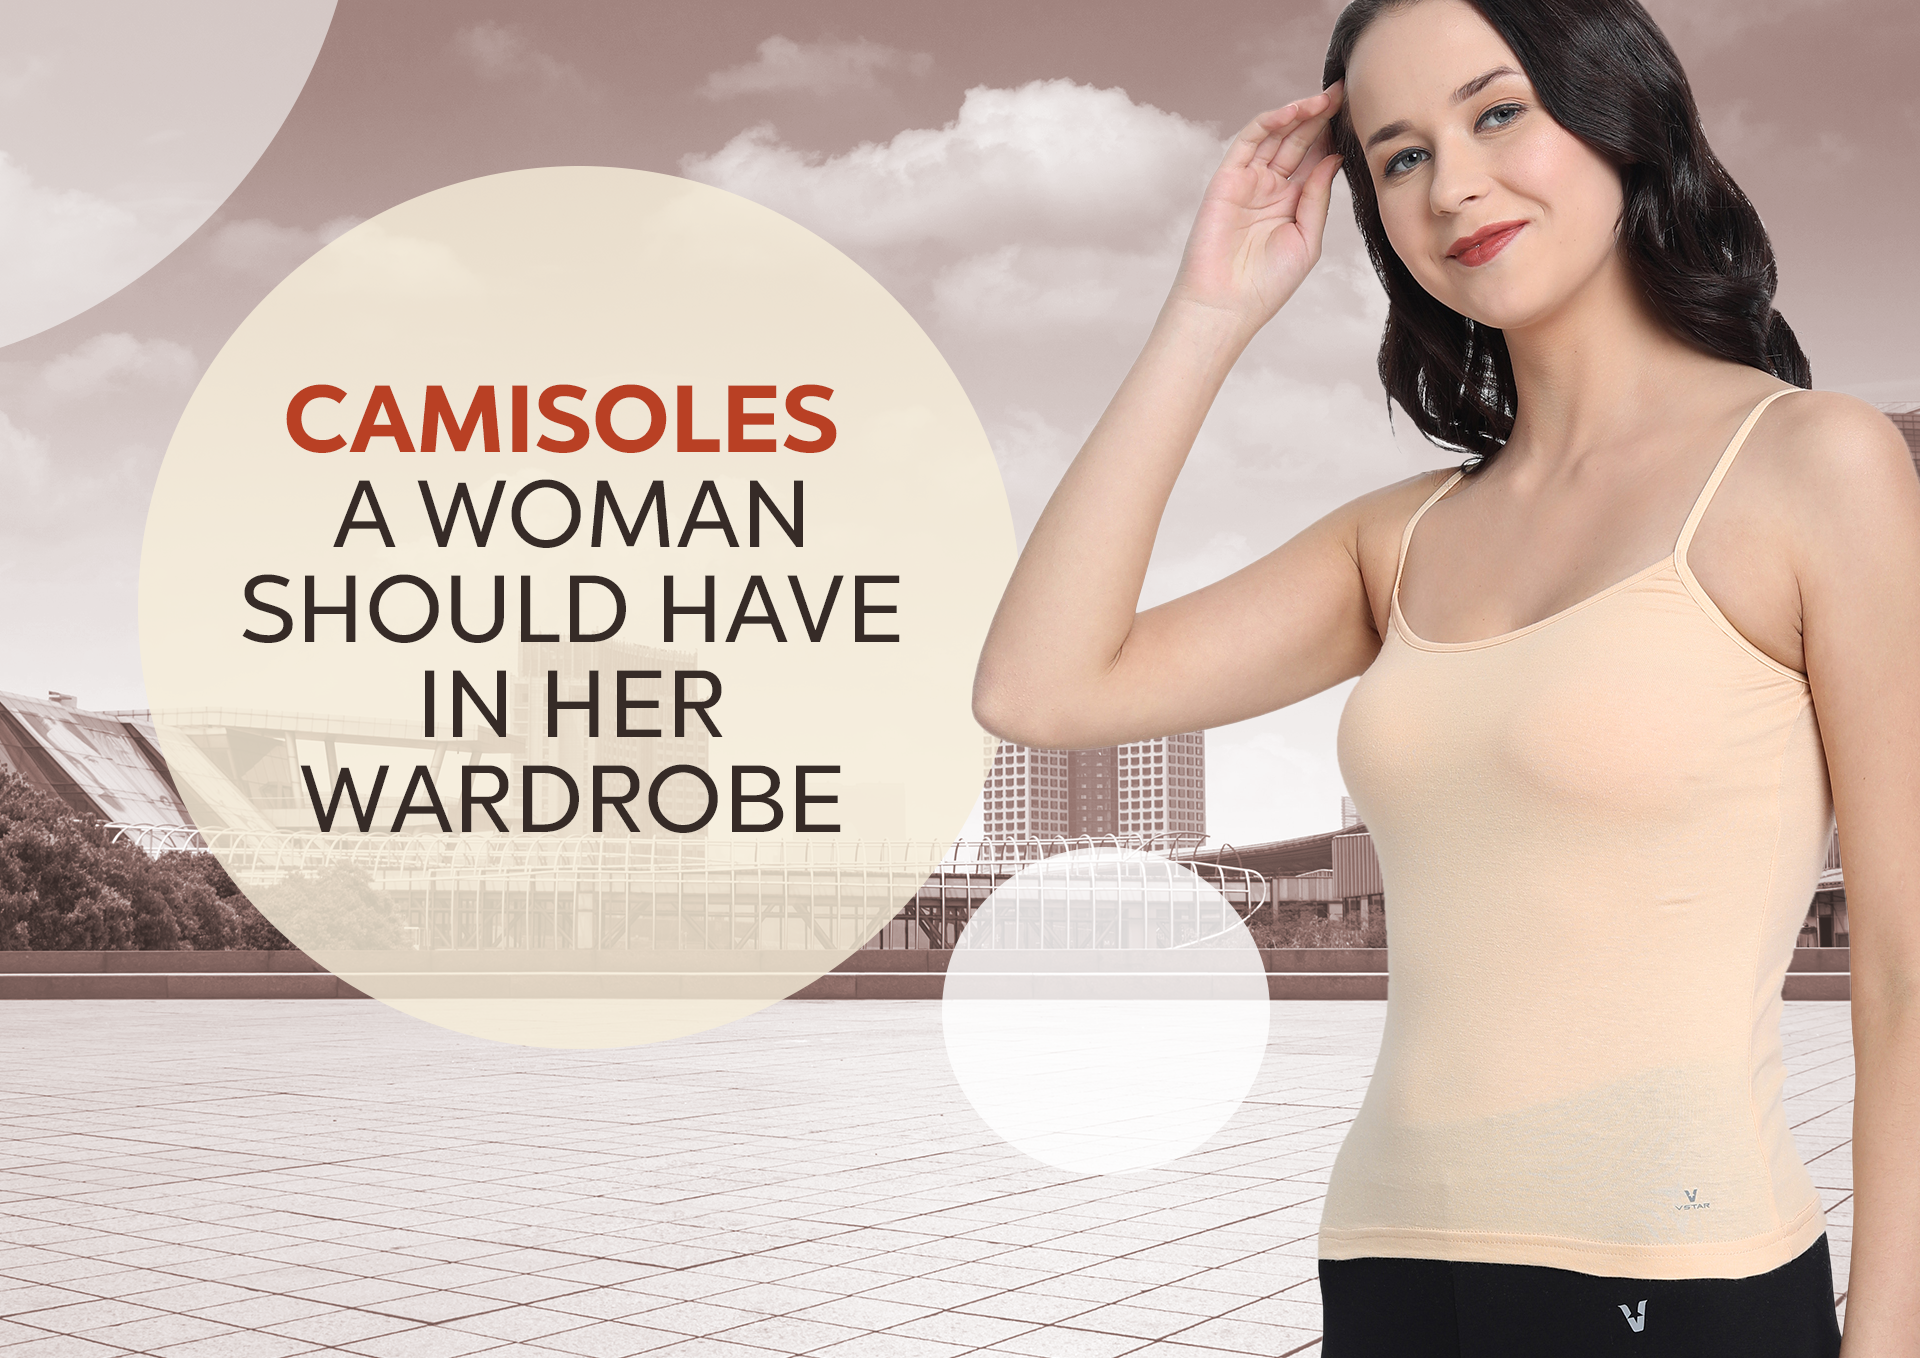 Unveiling the Top 7 Benefits of Camisoles for Girls – ATTWACT